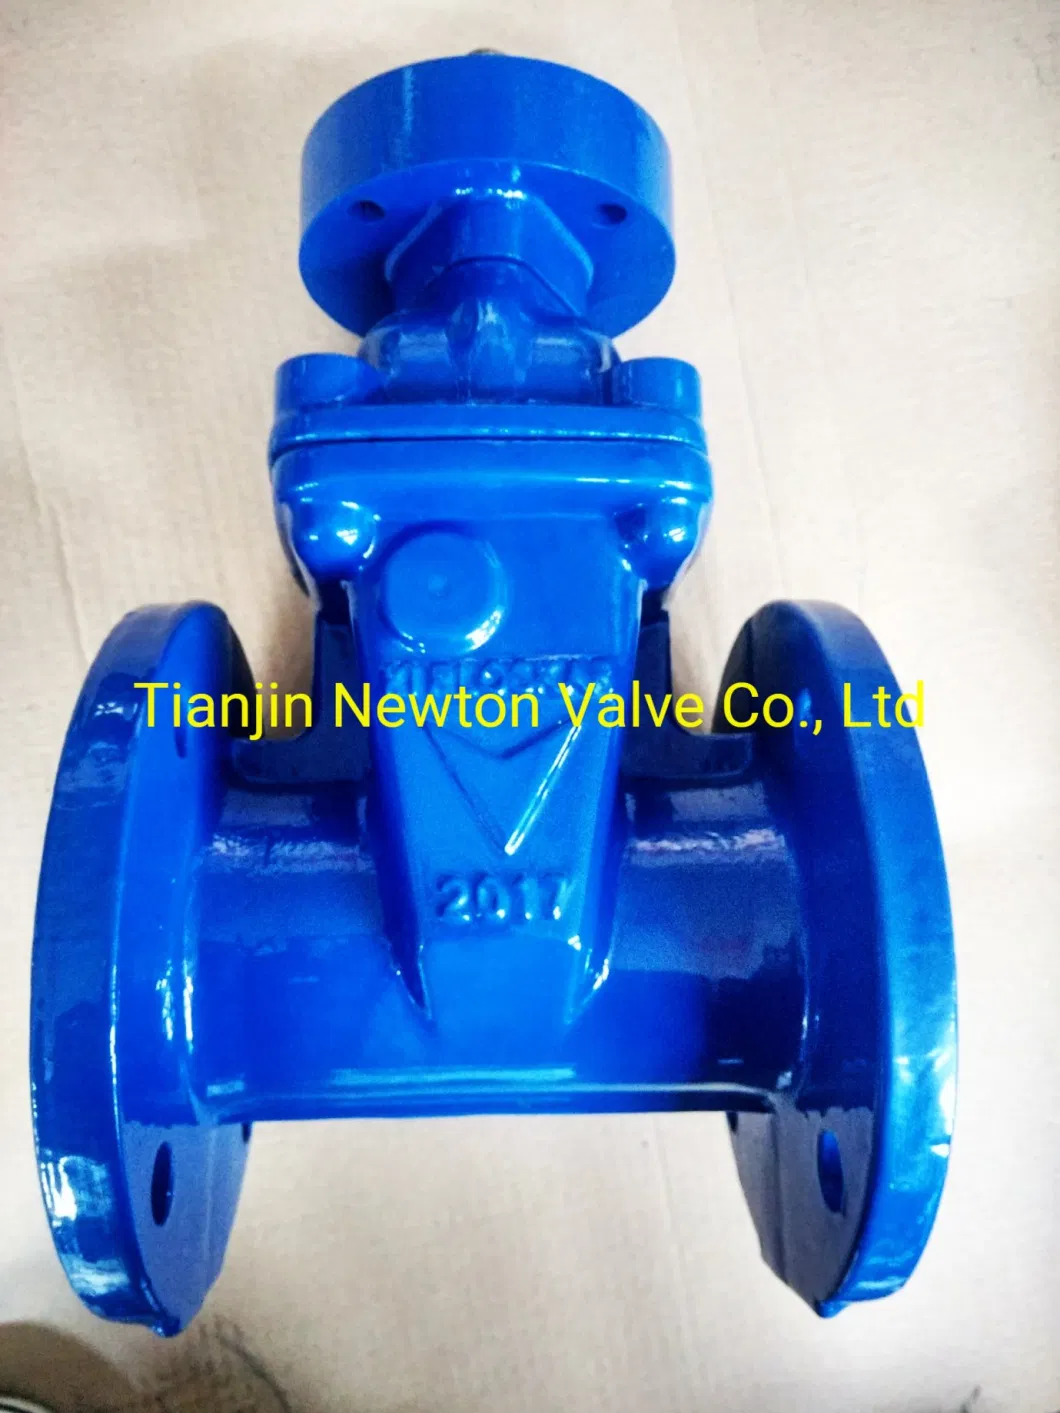 Resilient Seat Gate Valve DIN3352 F4 F5 with by Pass Valve Gearbox with Top Flange ISO 5210 ISO 5211 Mounting Pad with Electric Actuator Chain Handwheel Gearbox